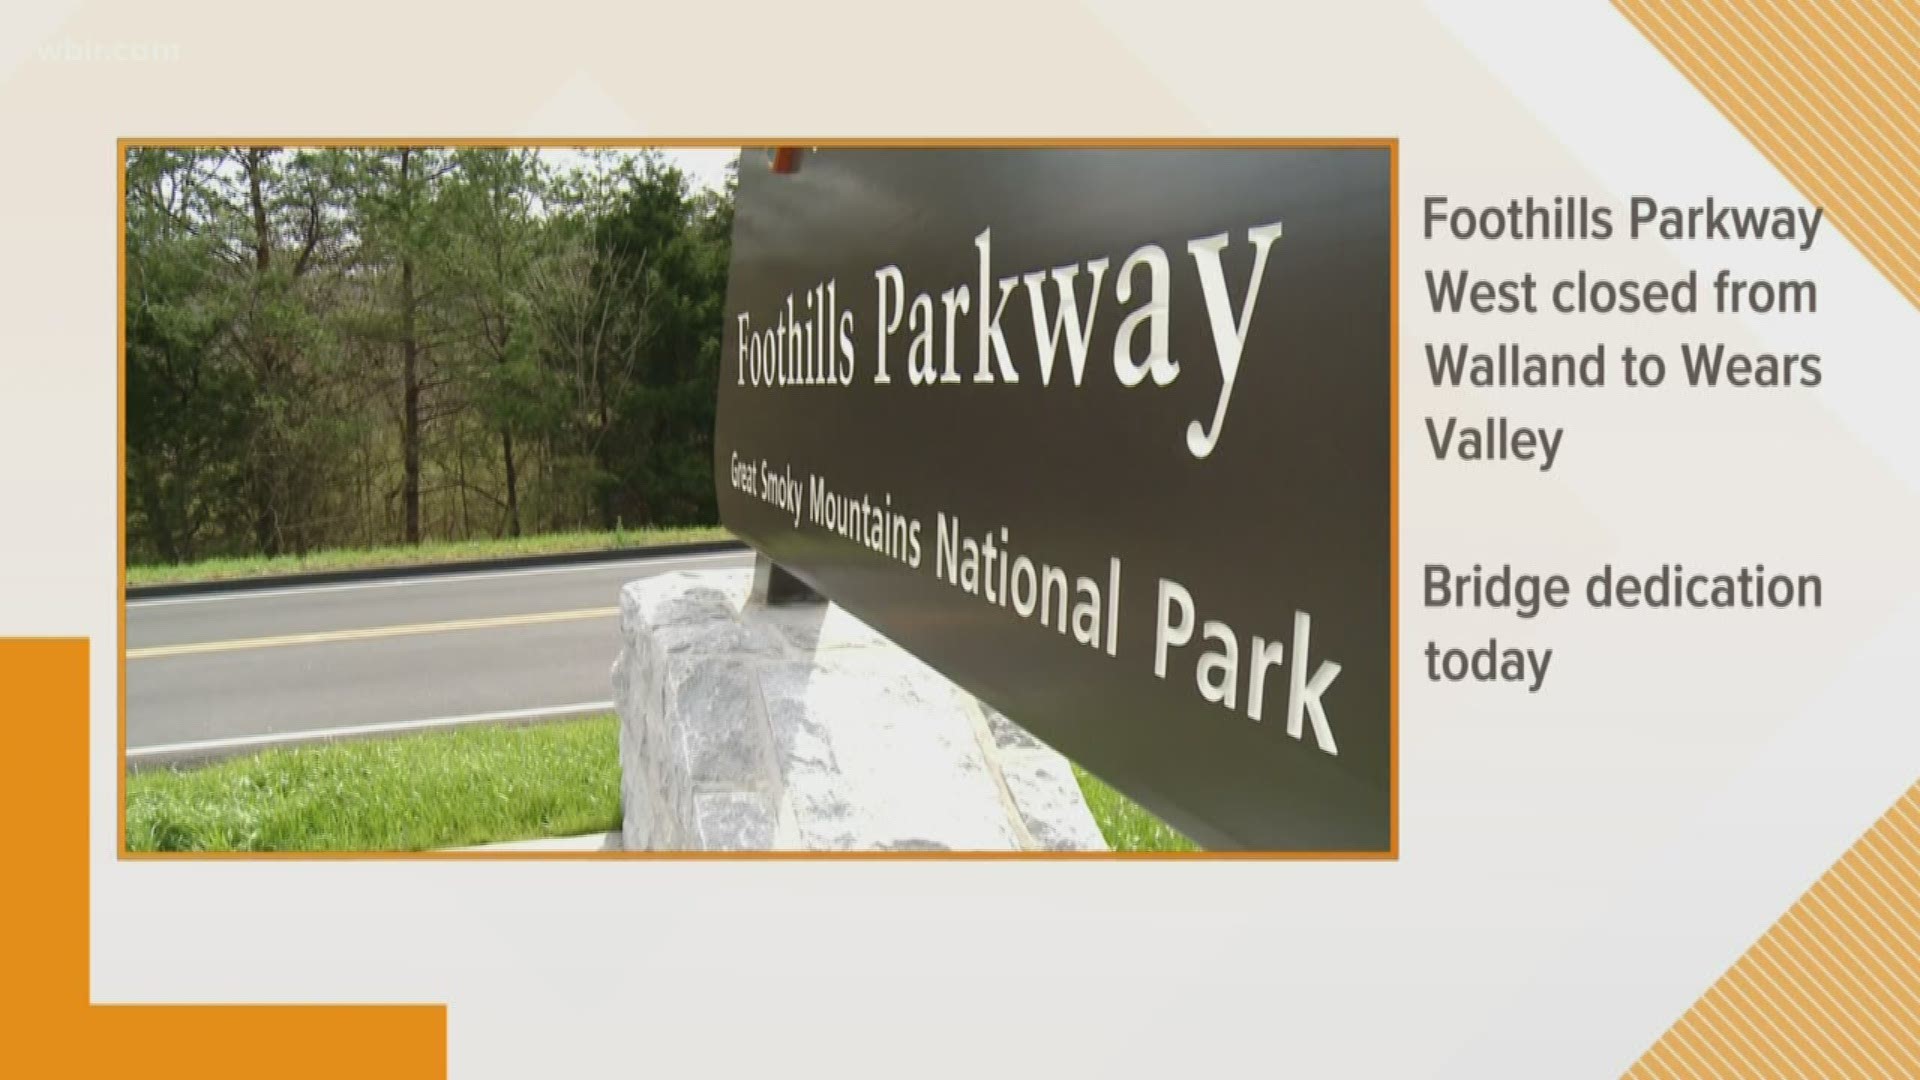 If you're headed to the Smokies Monday, Foothills parkway West is closed for a bridge dedication.